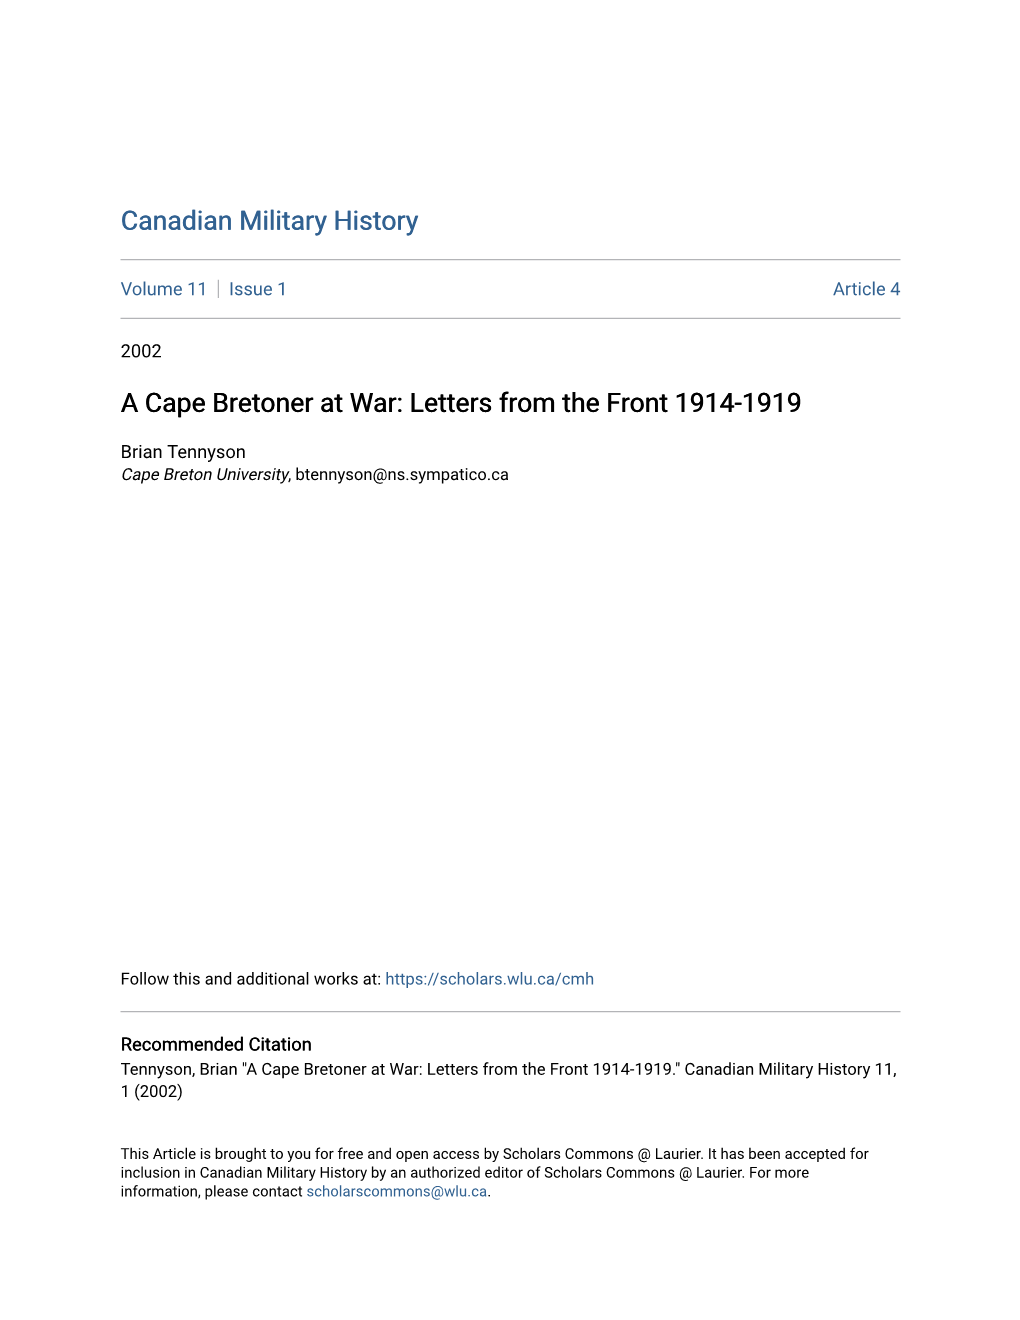 A Cape Bretoner at War: Letters from the Front 1914-1919